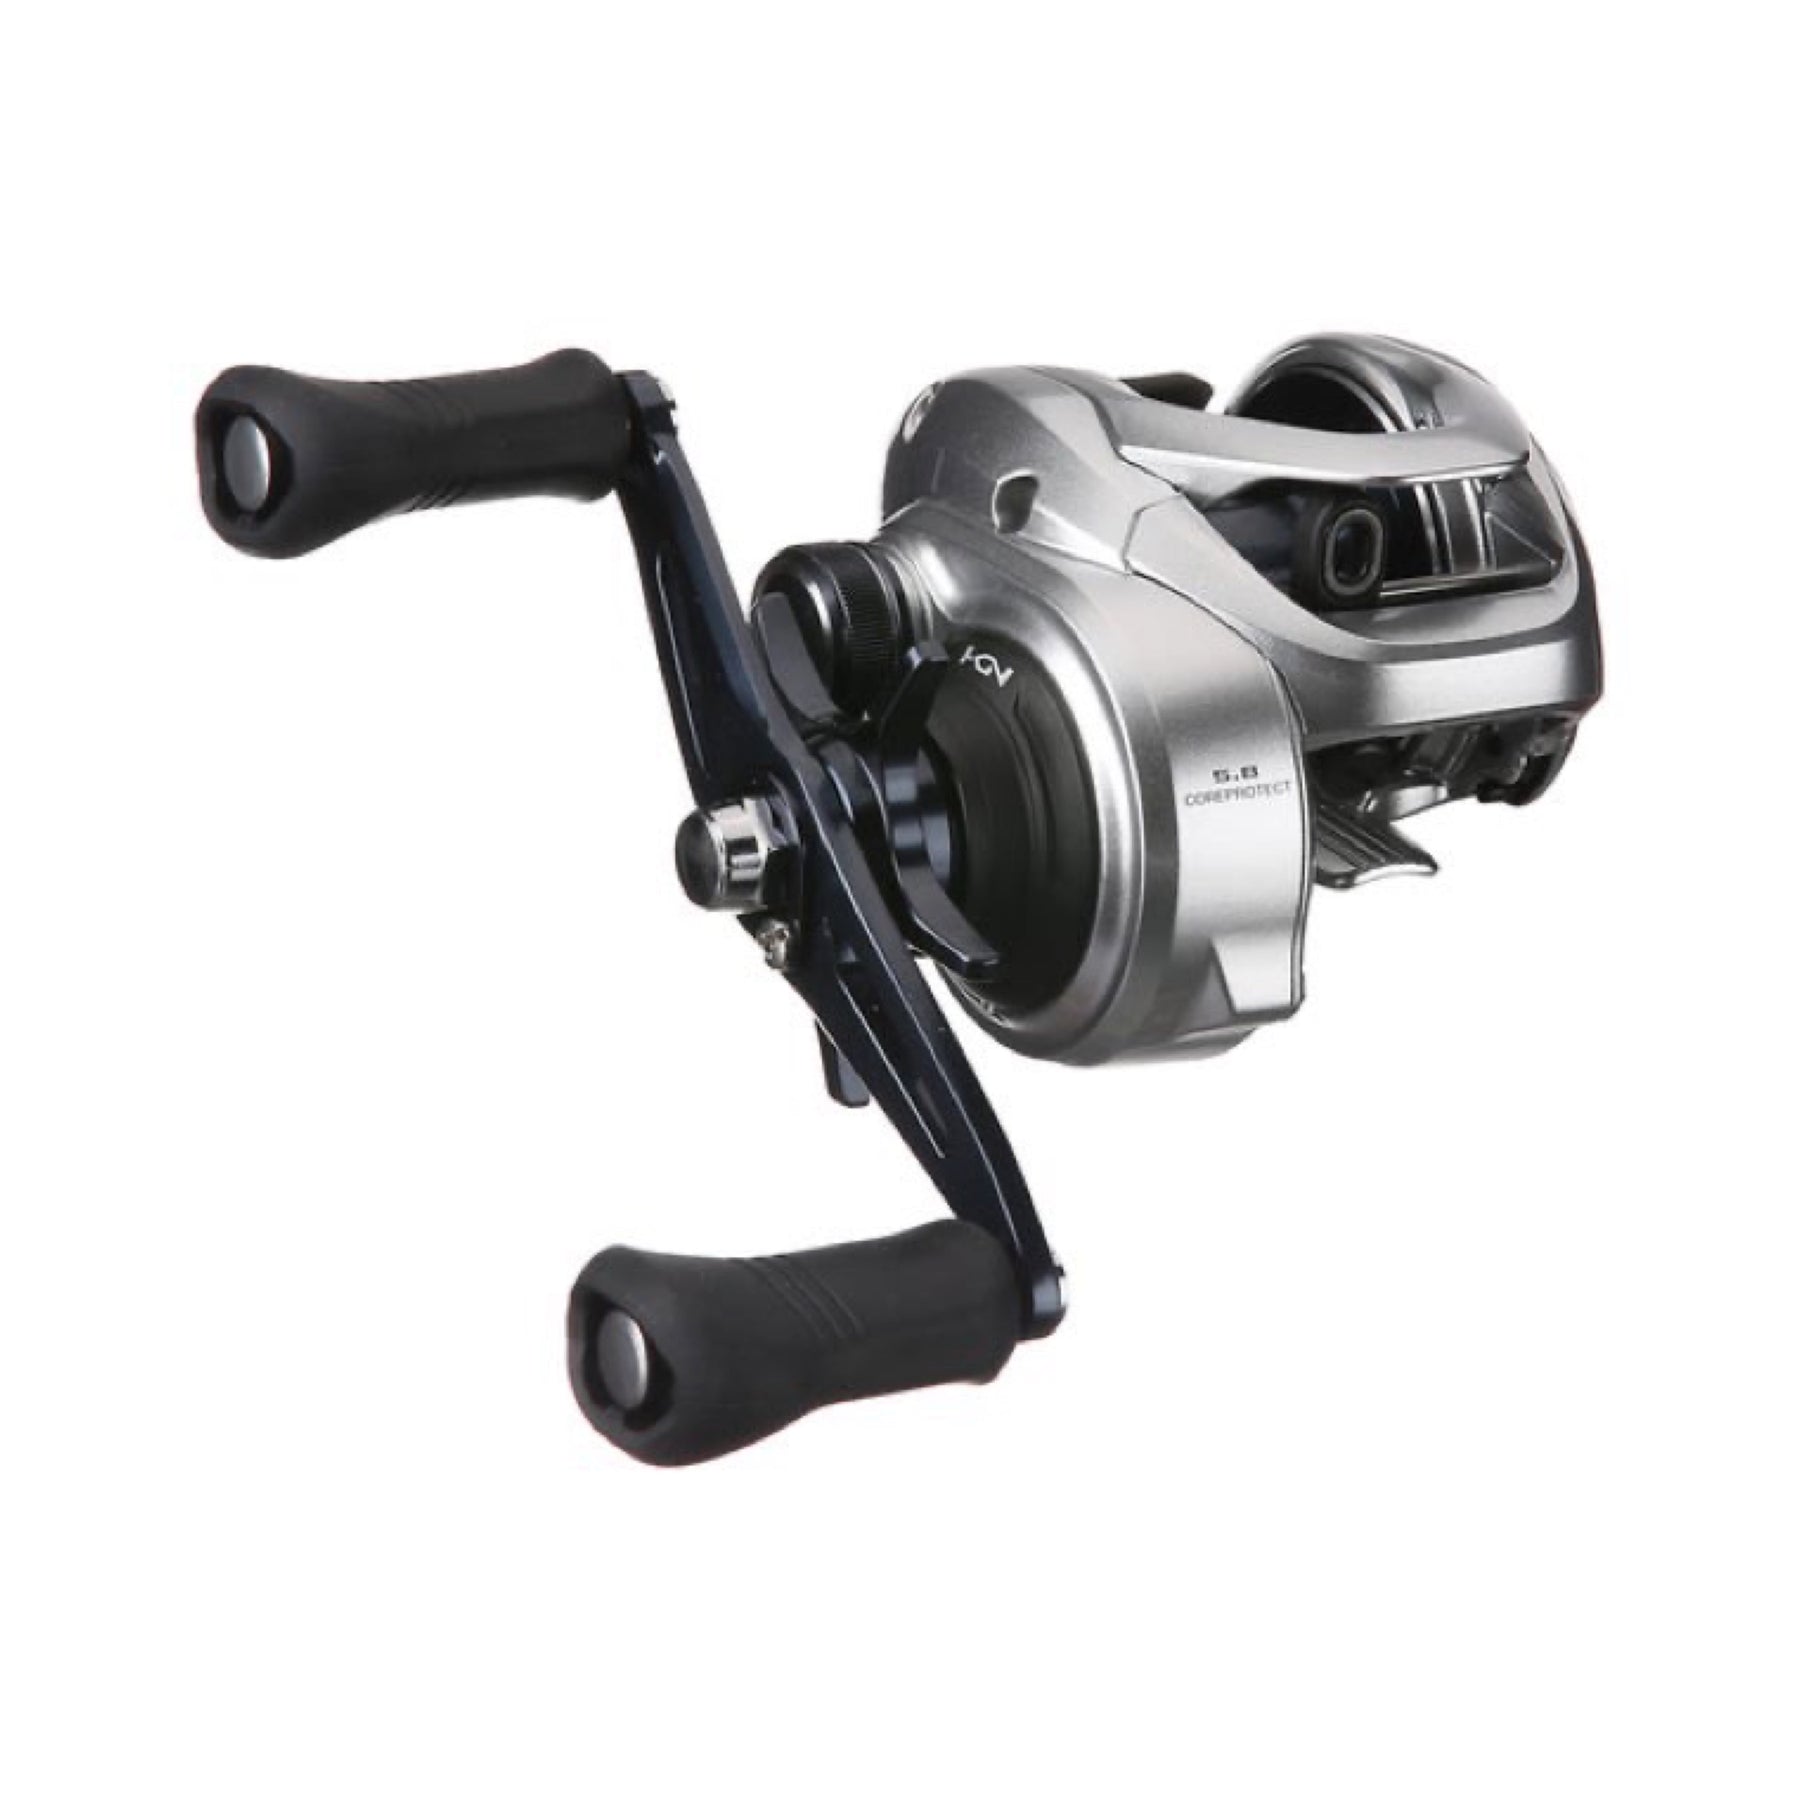 Baitcast Reels at Tractor Supply Co.